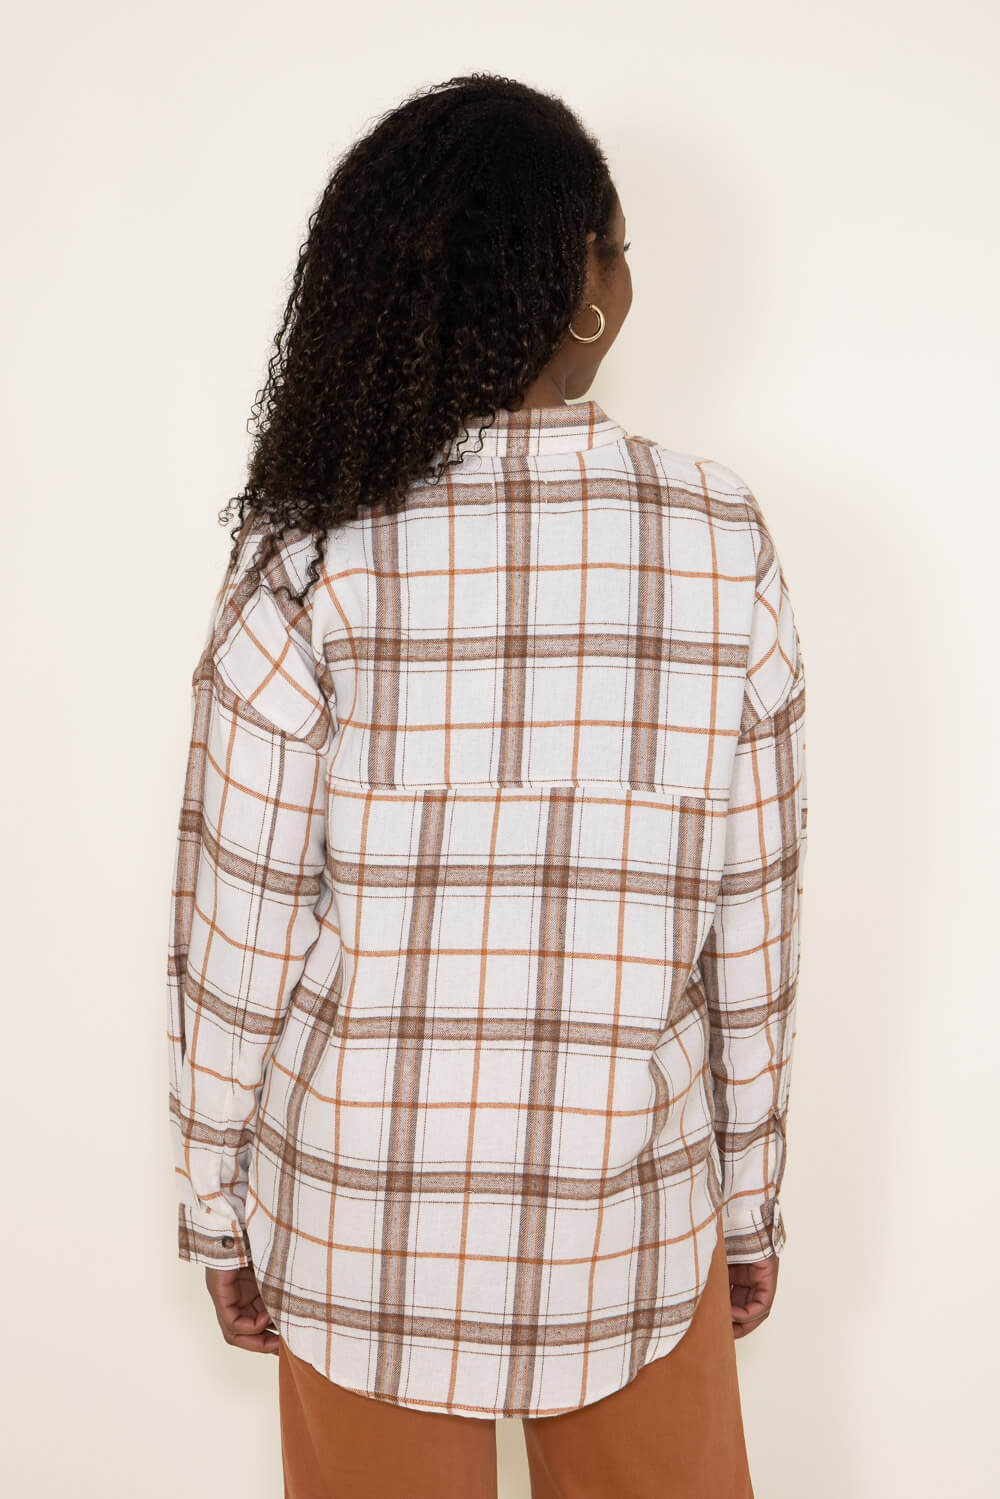 Simply Southern Plaid Button Up Shirt for Women in White/Brown